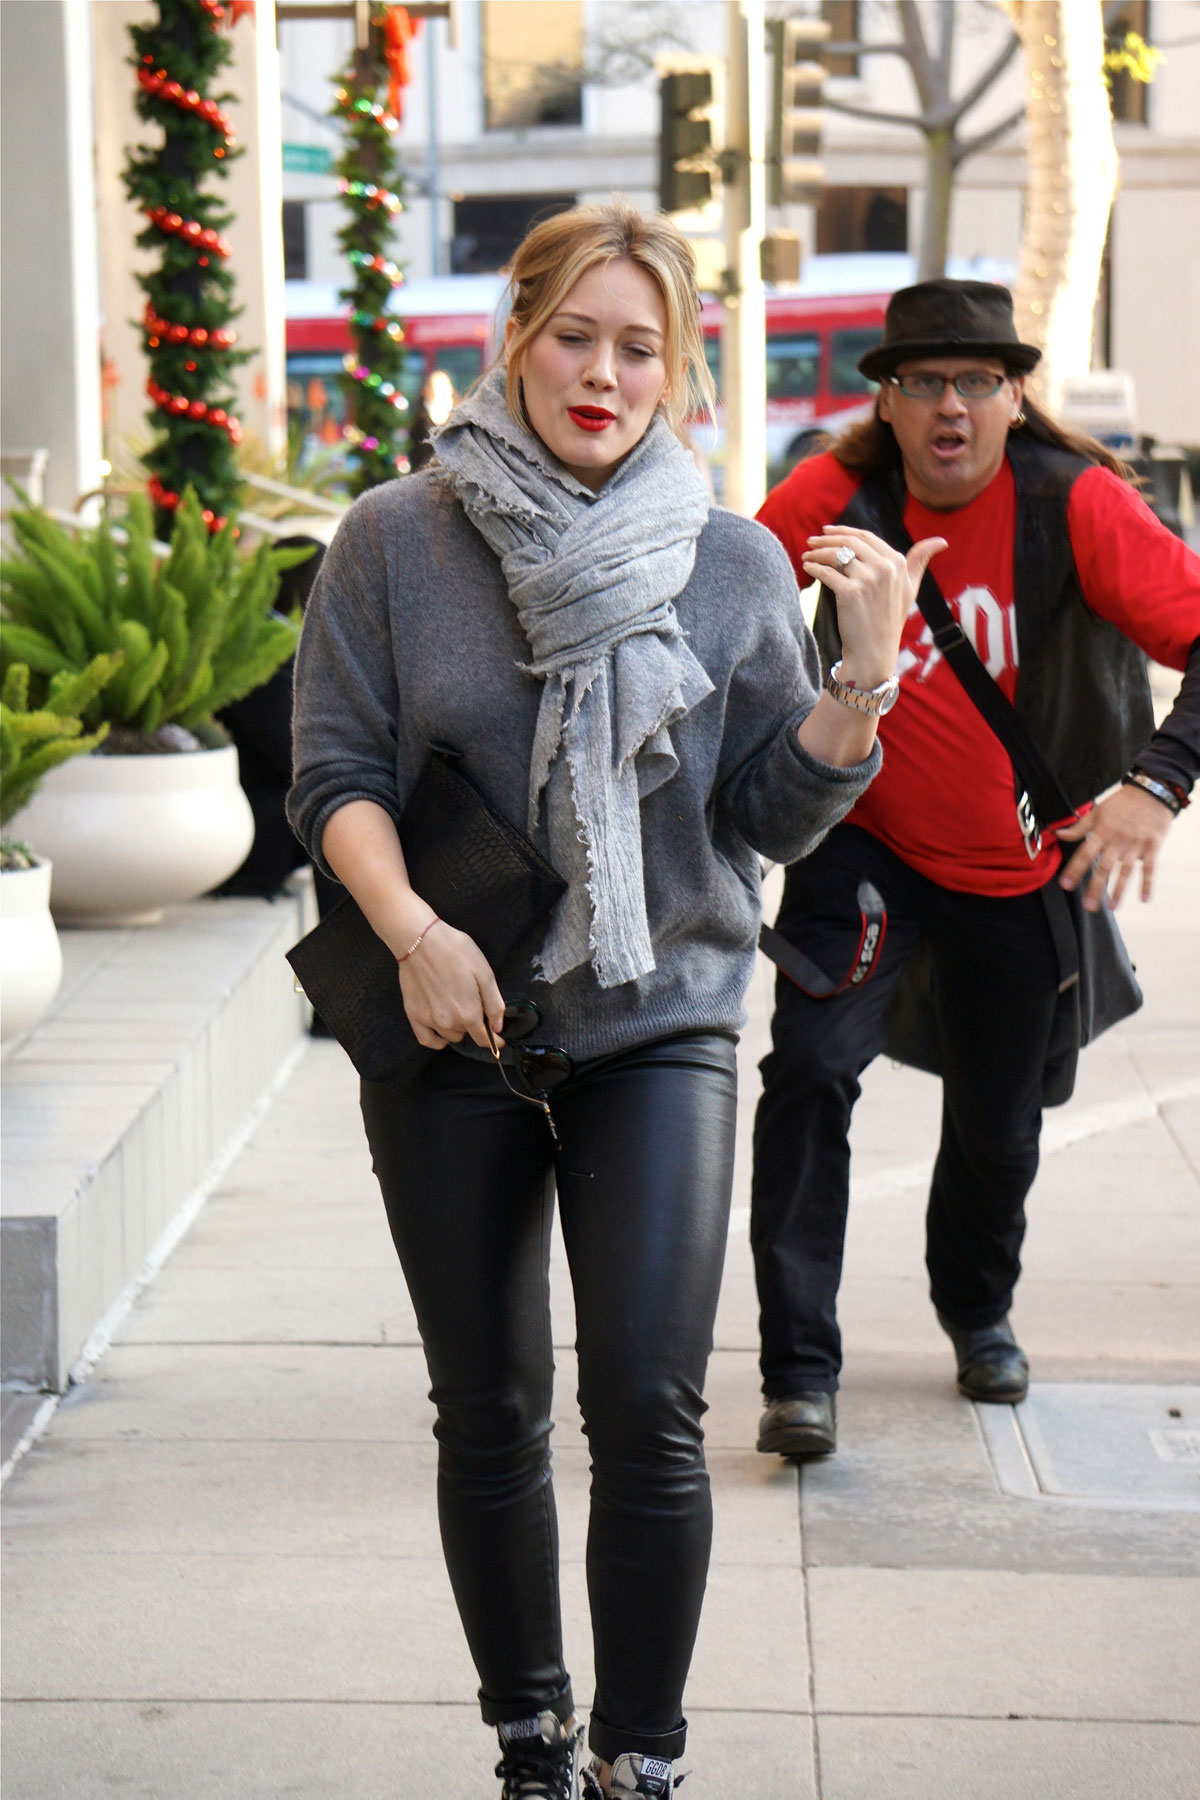 Hilary Duff seen out and about in LA